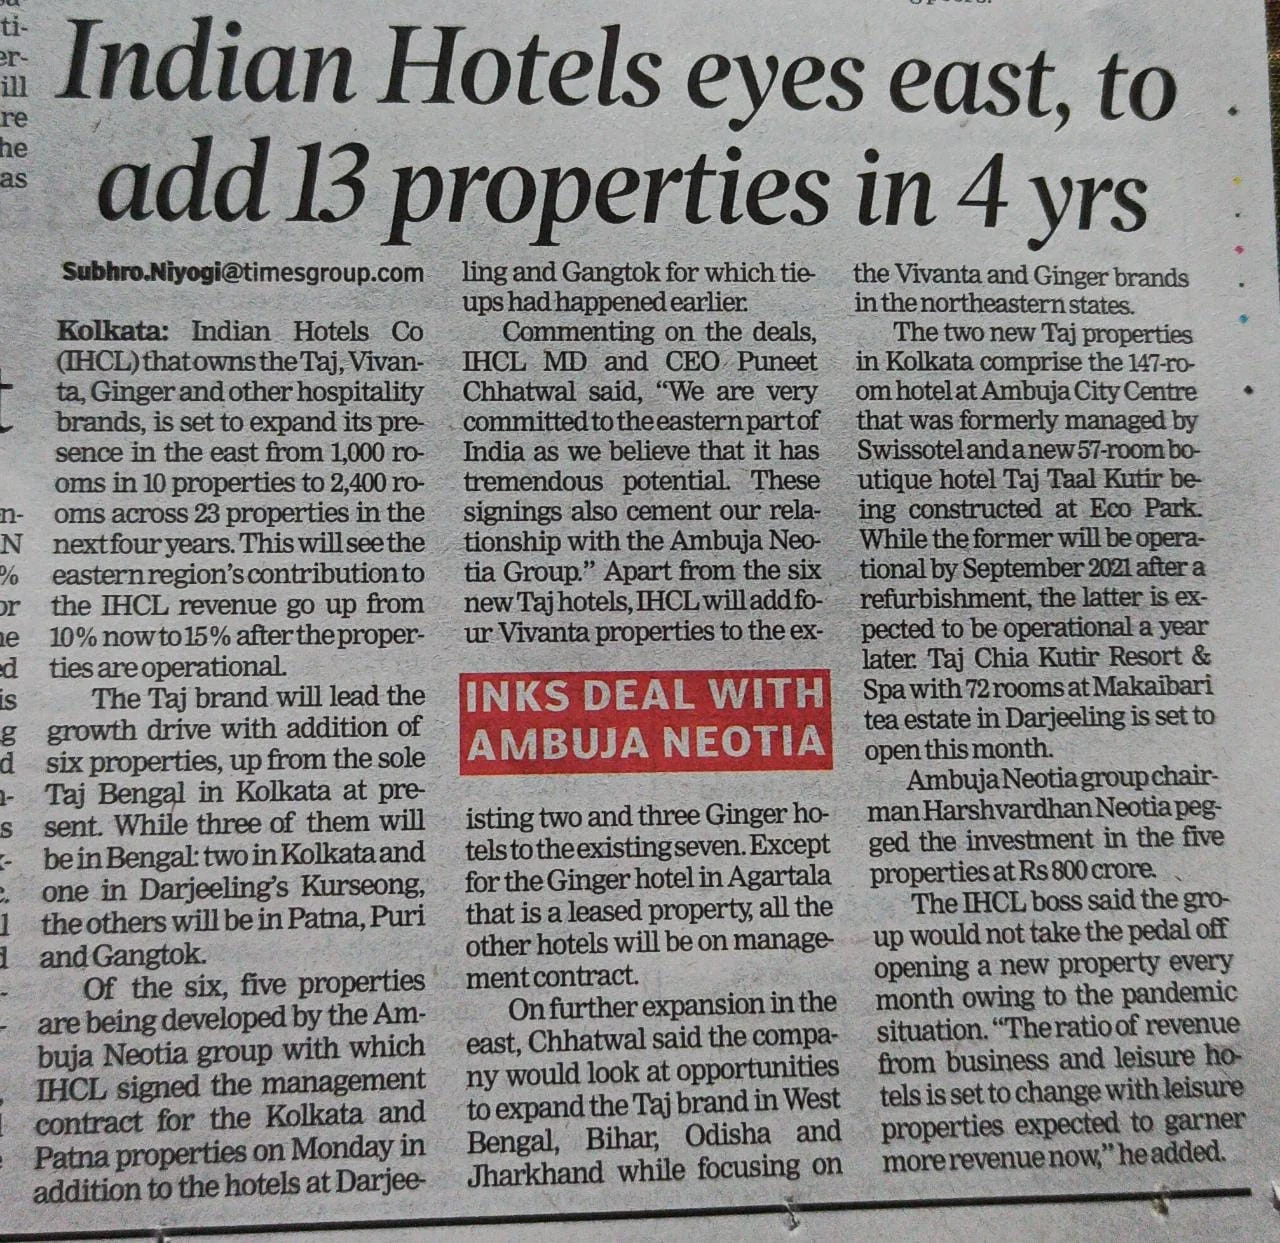 Indian Hotels eyes east, to add 13 properties in 4 years – The Times of India